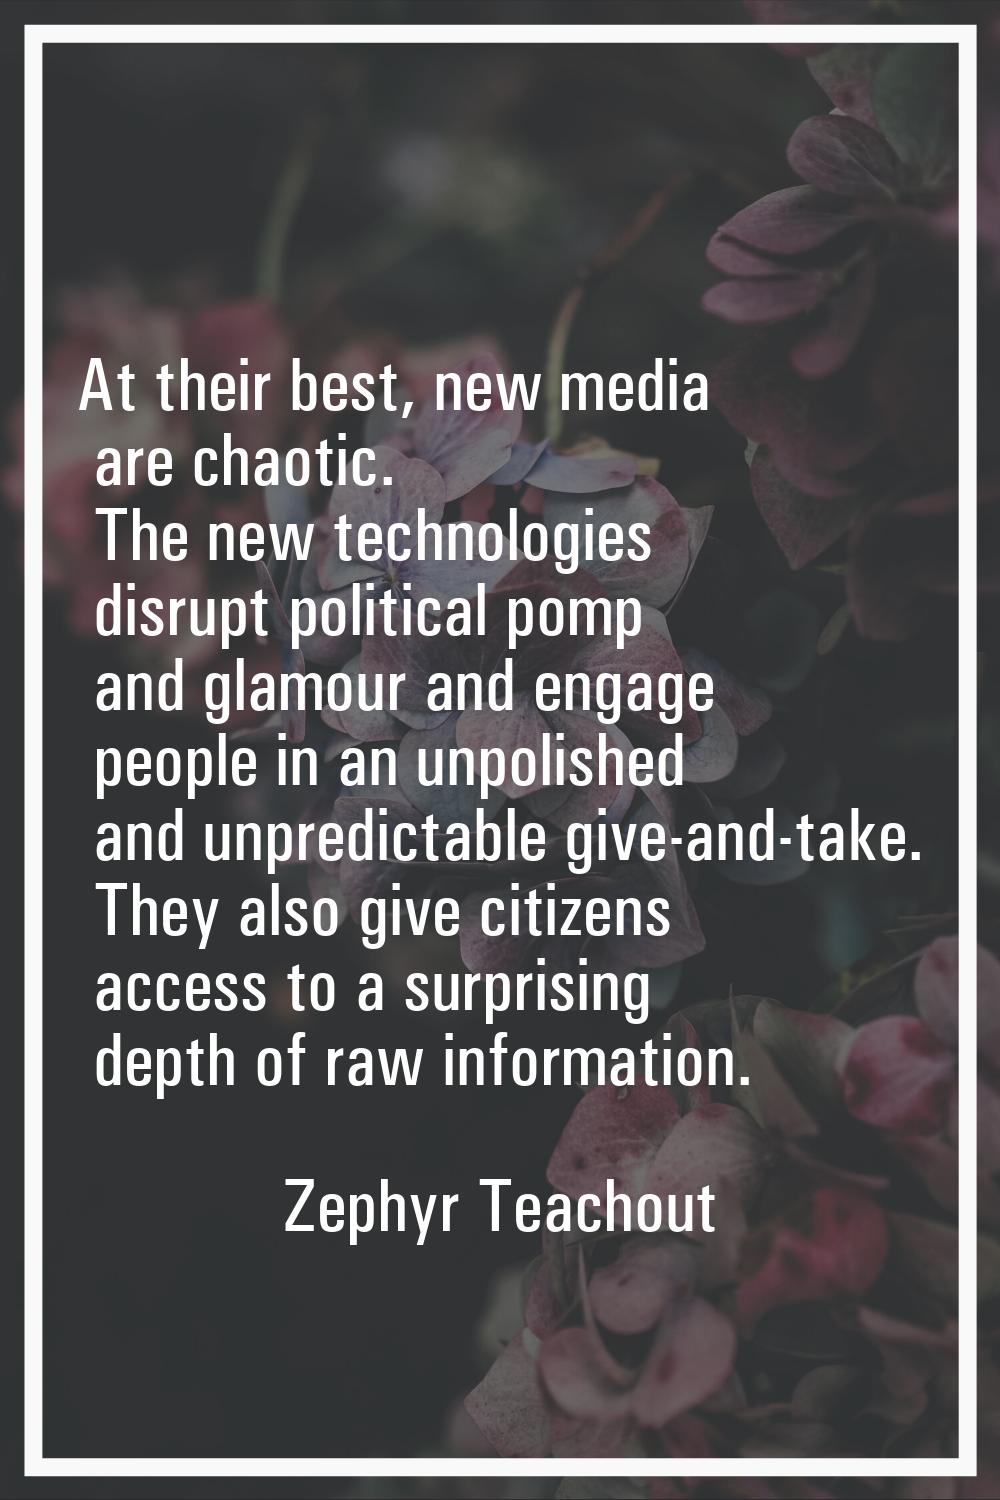 At their best, new media are chaotic. The new technologies disrupt political pomp and glamour and e